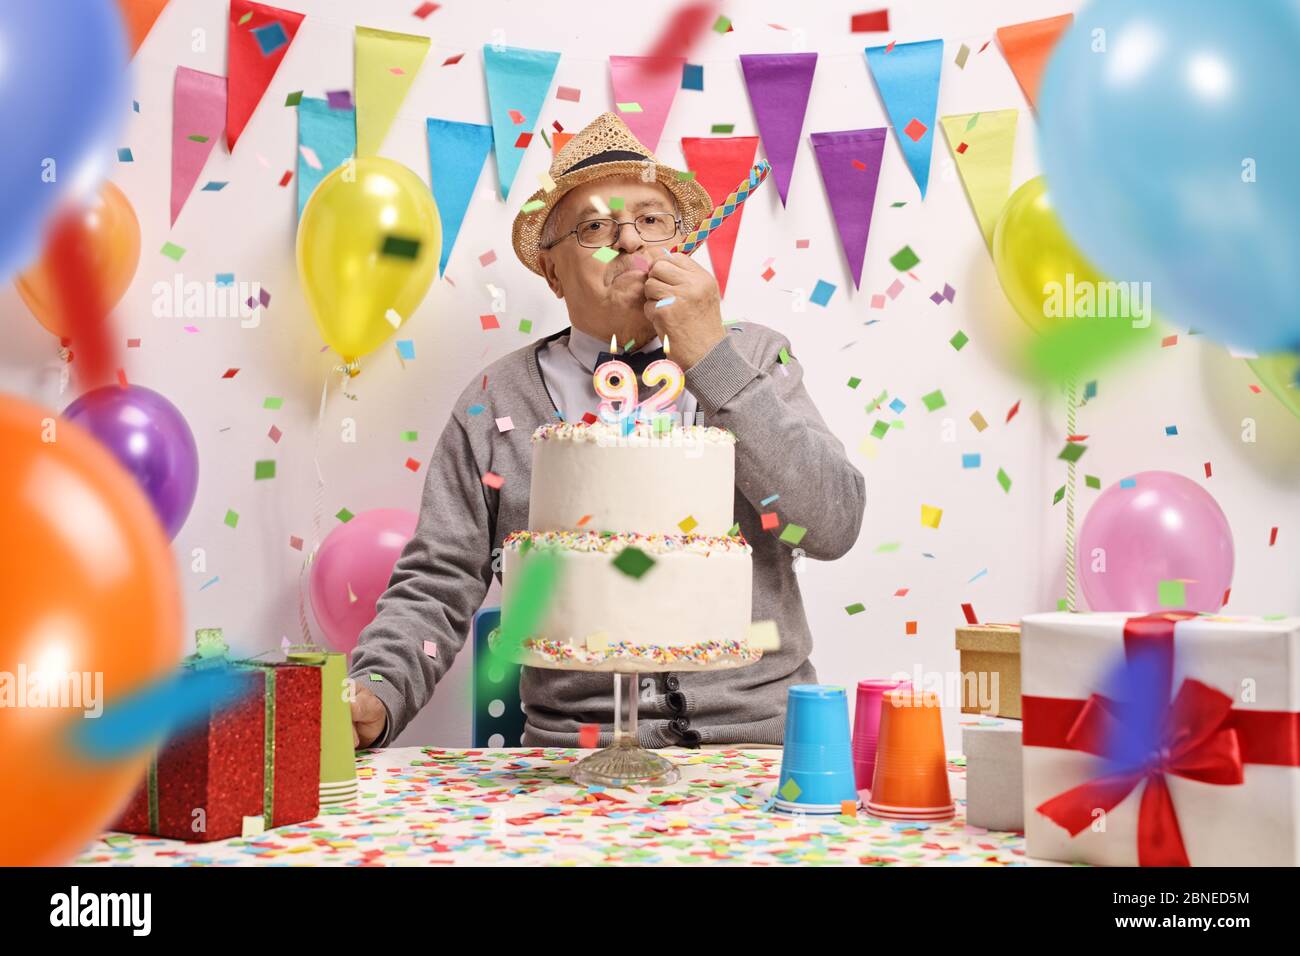 Elderly man celebrating birthday with a cake, balloons and confetti Stock Photo